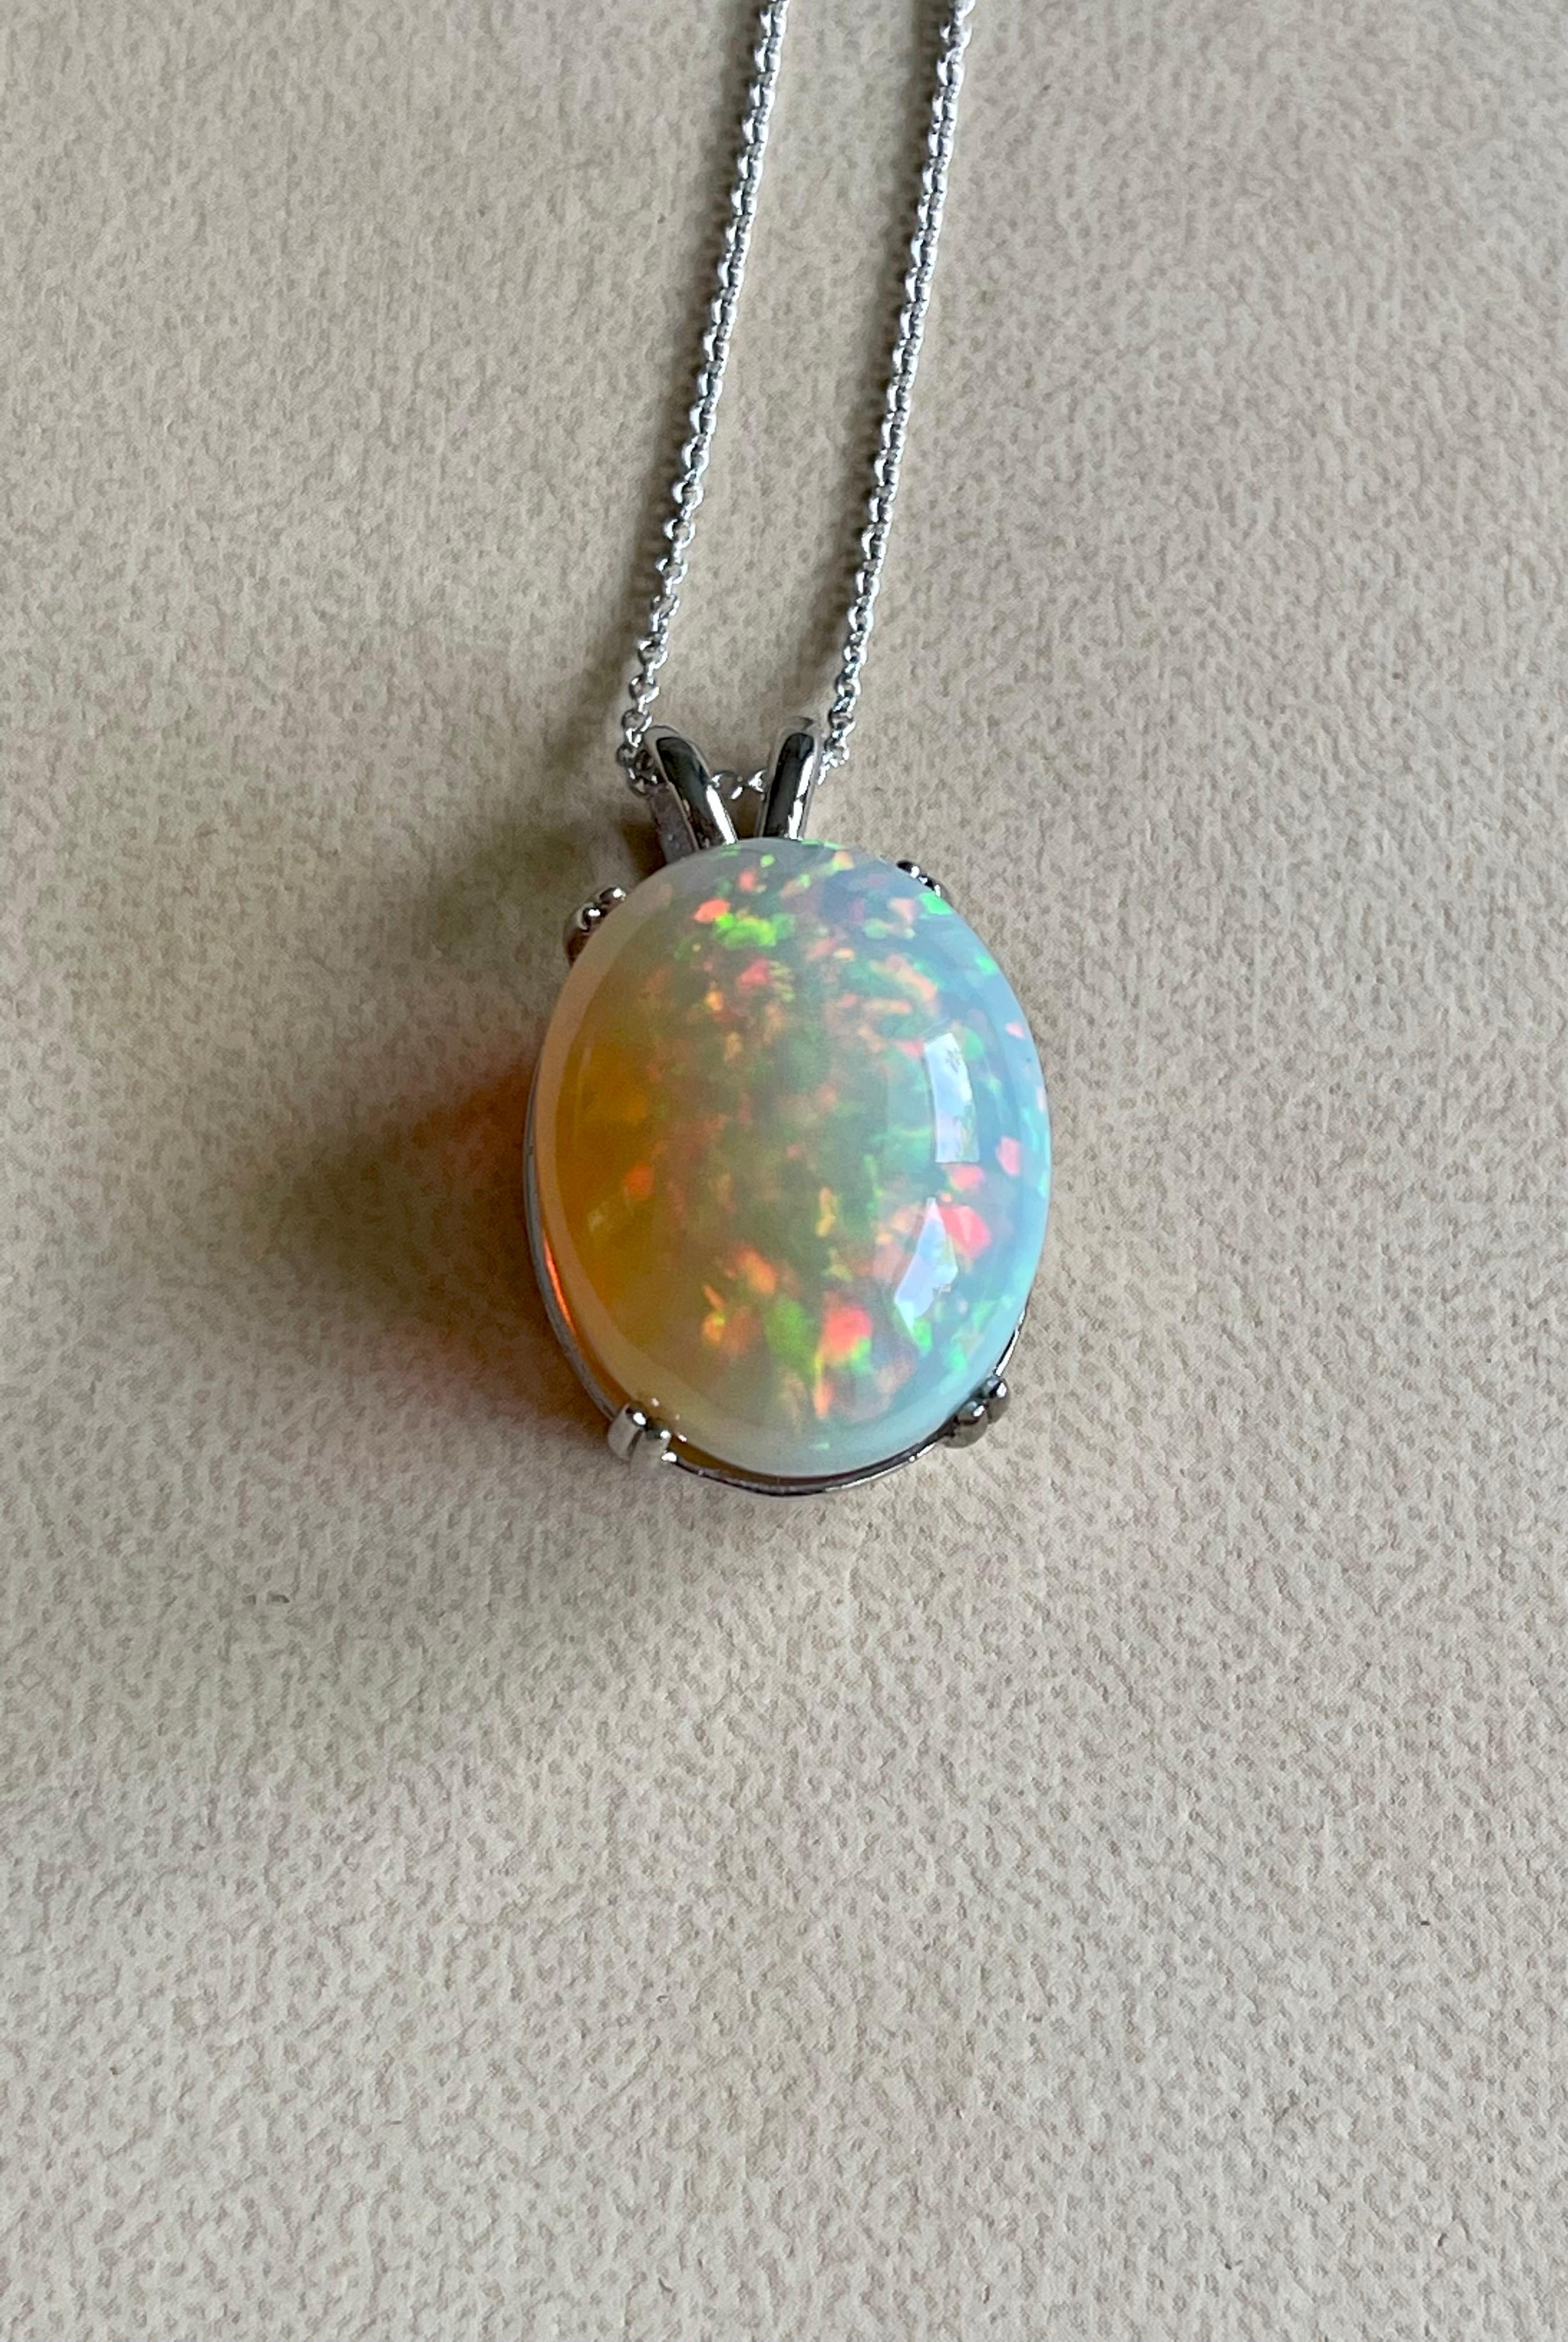 40 Carat Oval Ethiopian Opal Pendant / Necklace 14 Karat Yellow Gold Necklace In Excellent Condition For Sale In New York, NY